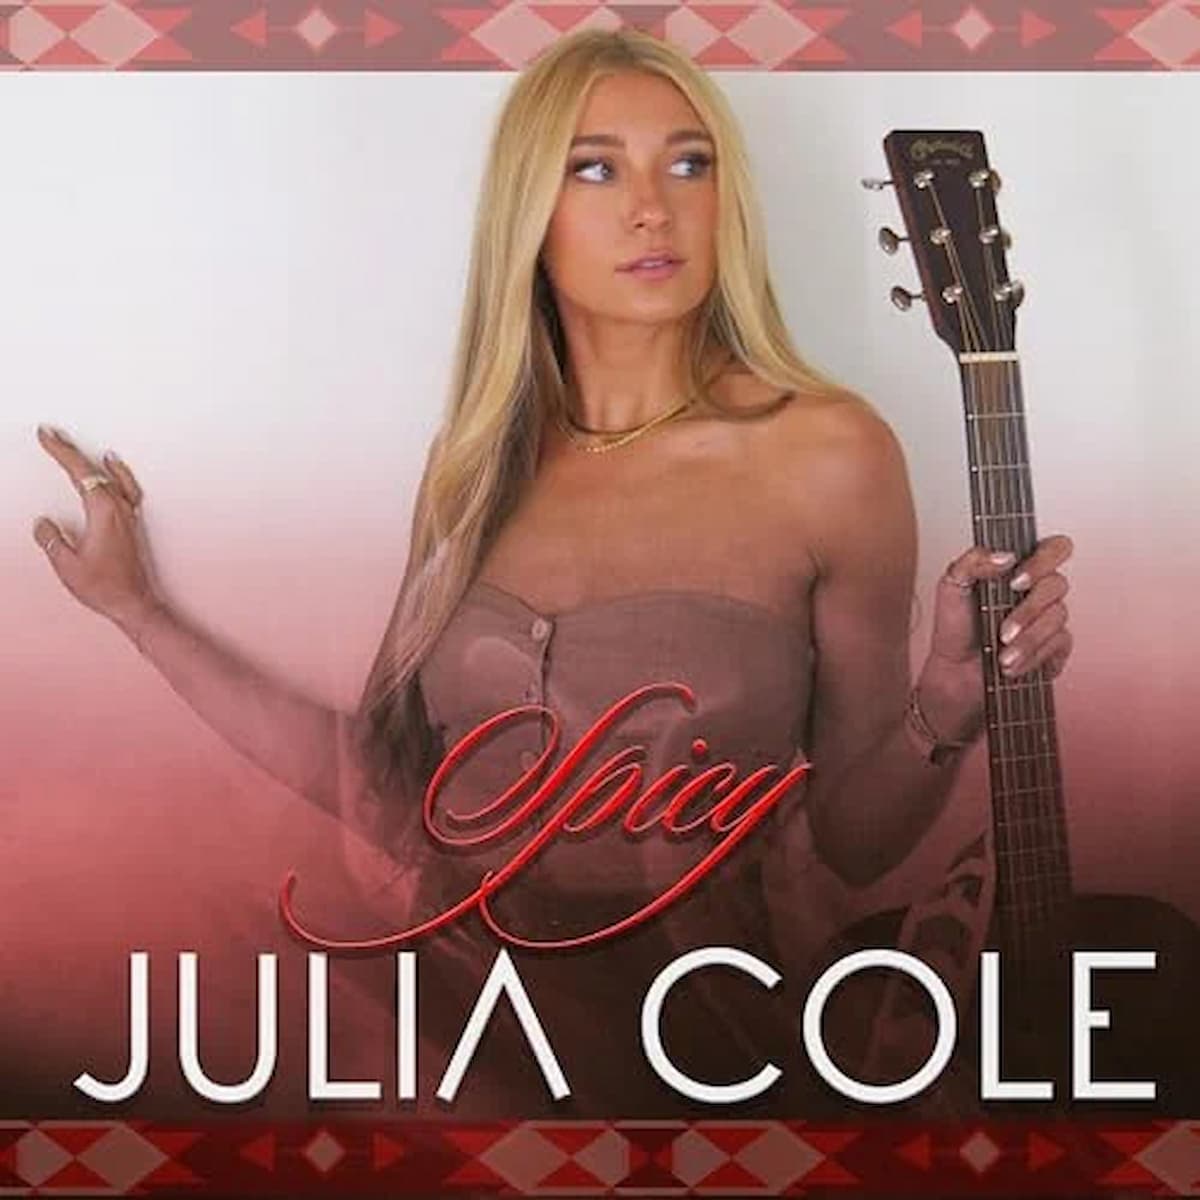 Julia Cole Neuer Country-Song “Spicy”